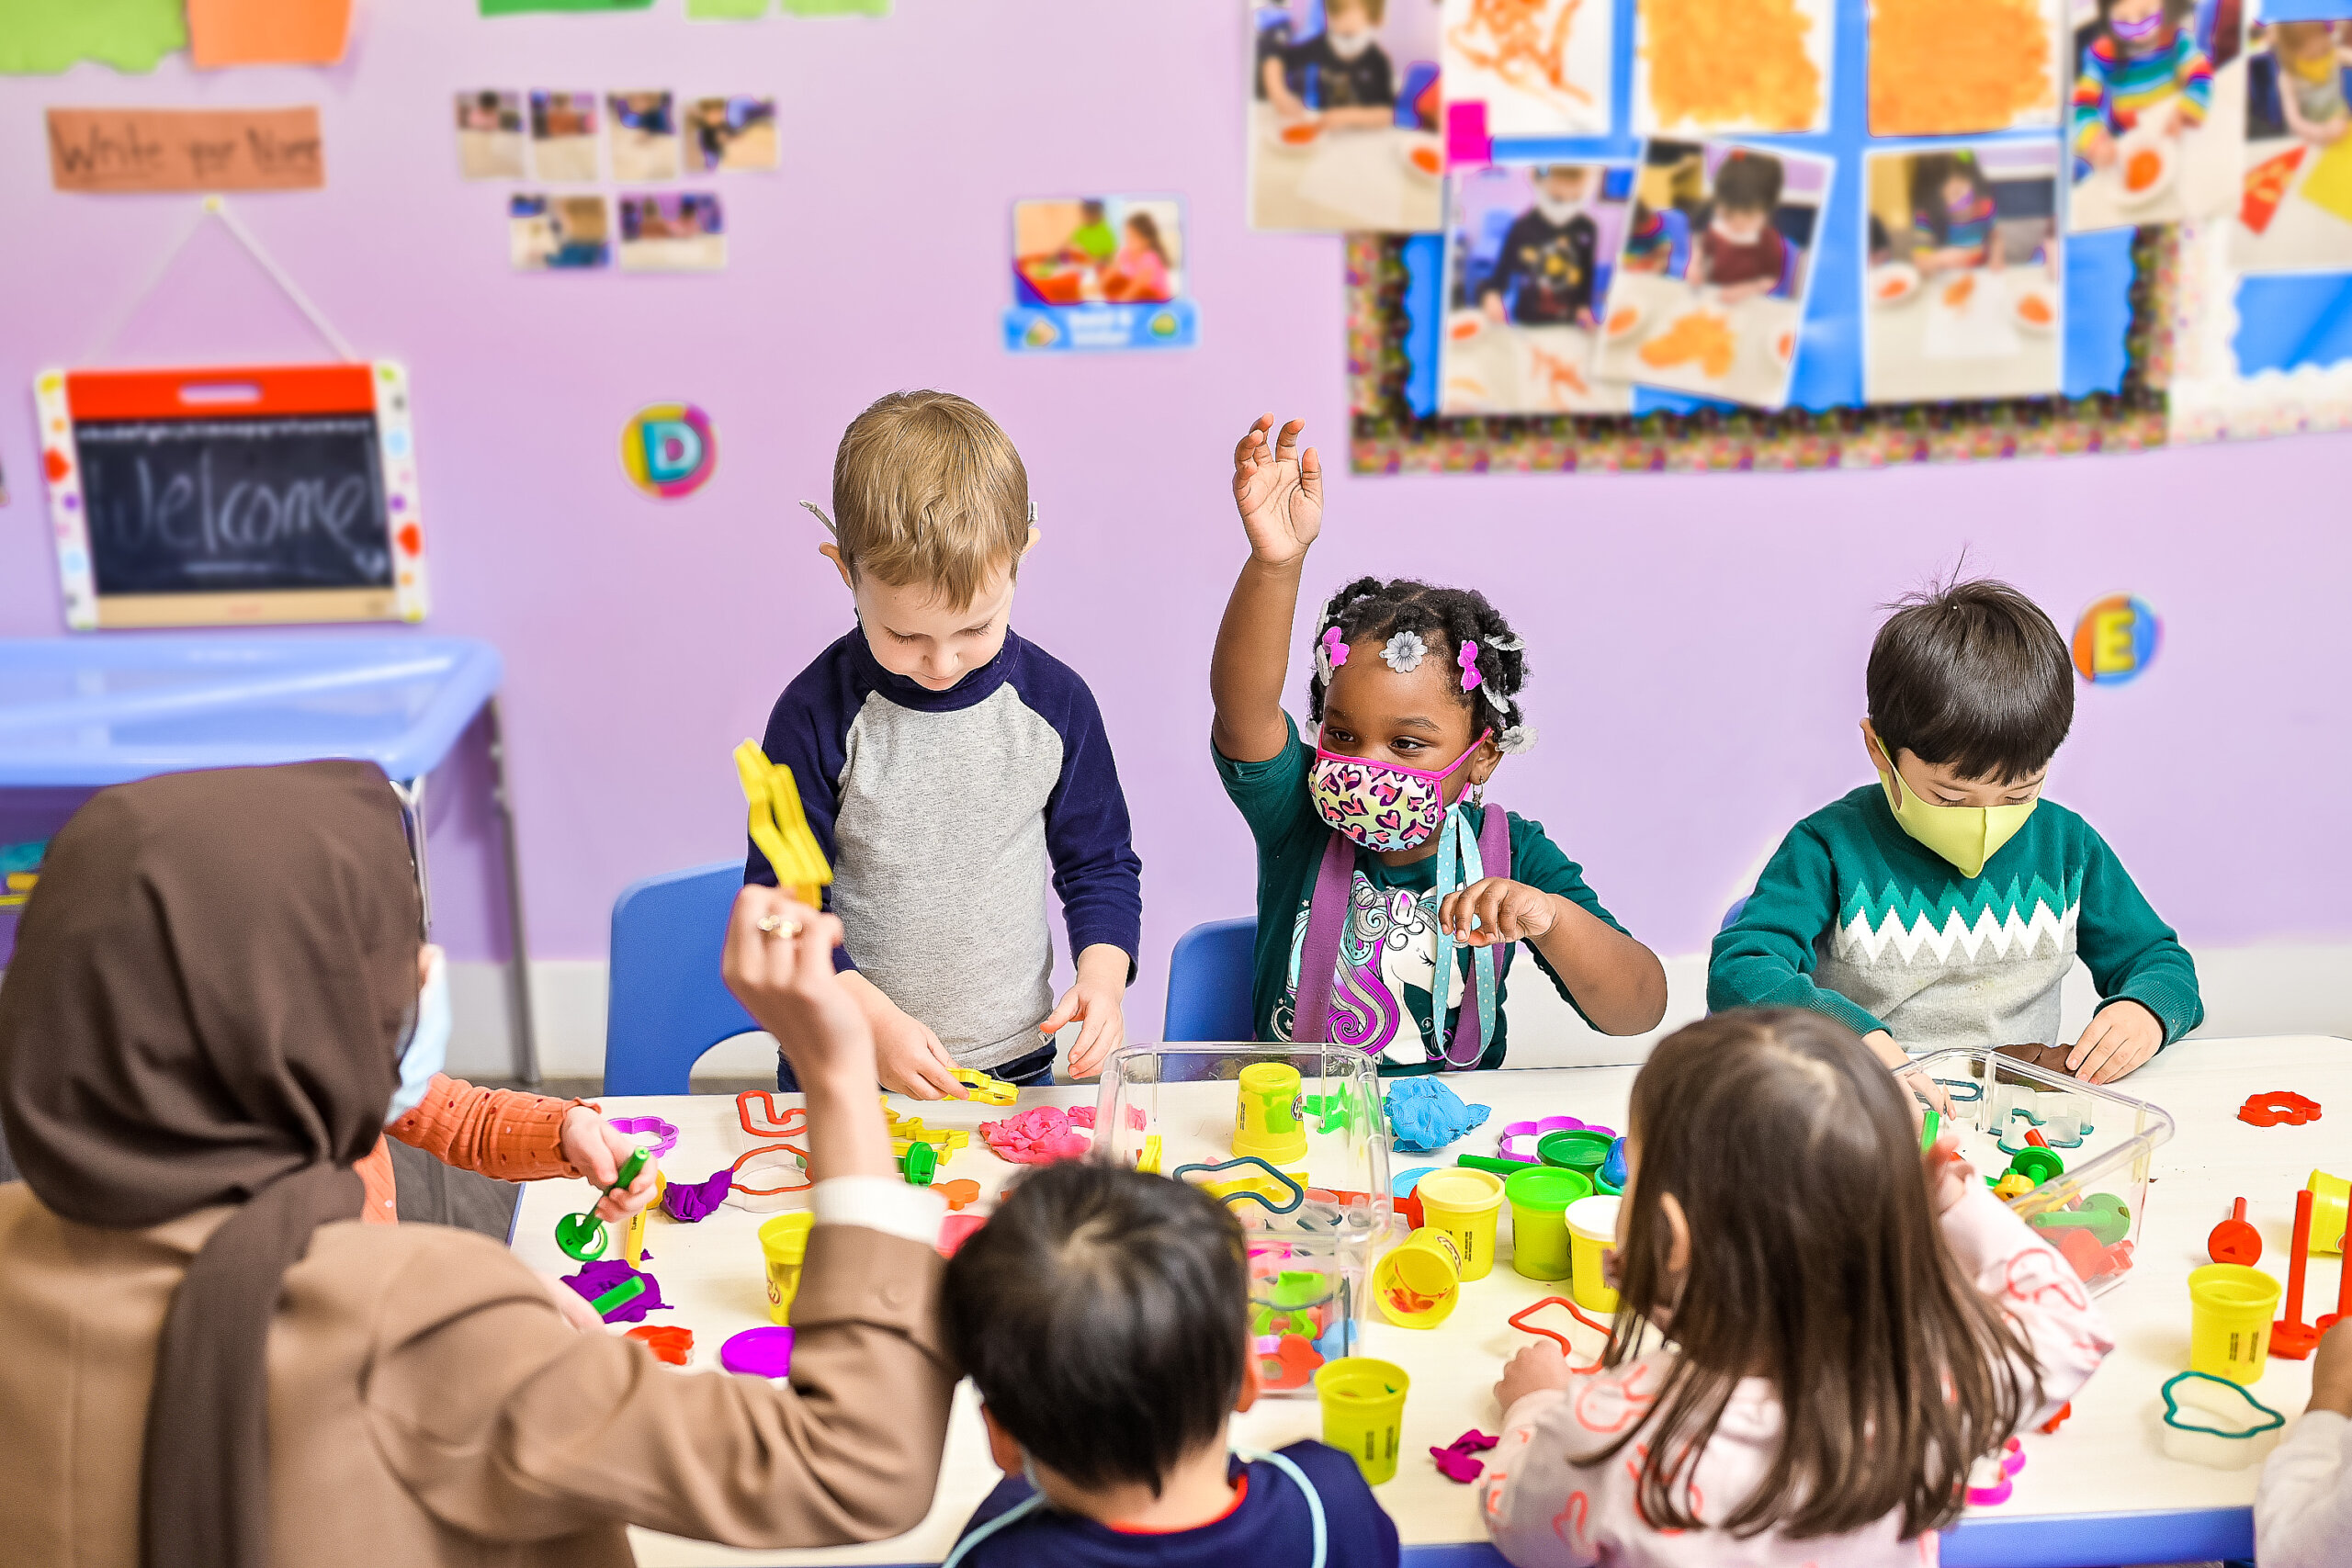 Group of young children wearing face masks sitting around a table doing crafts in a daycare classroom, with one child raising her hand